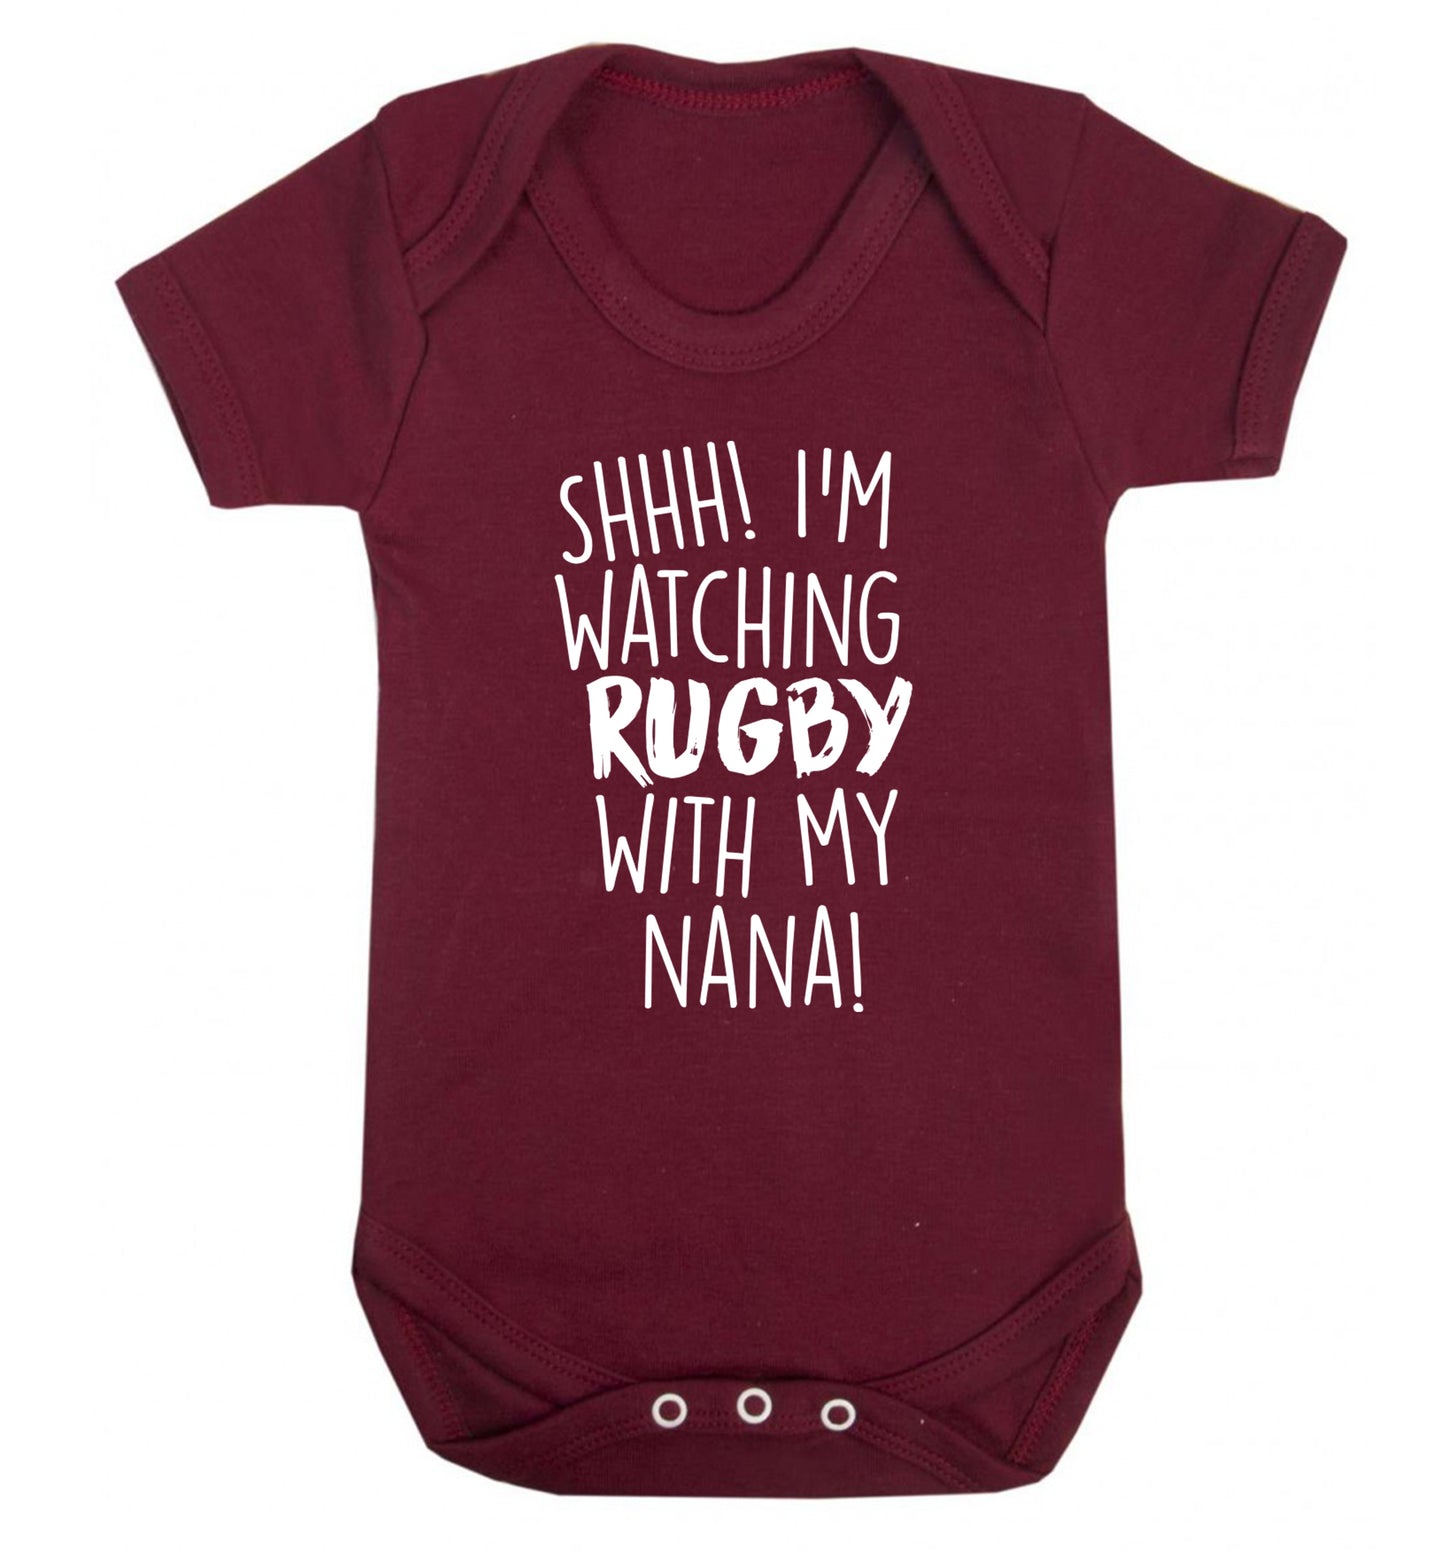 Shh I'm watching rugby with my nana Baby Vest maroon 18-24 months